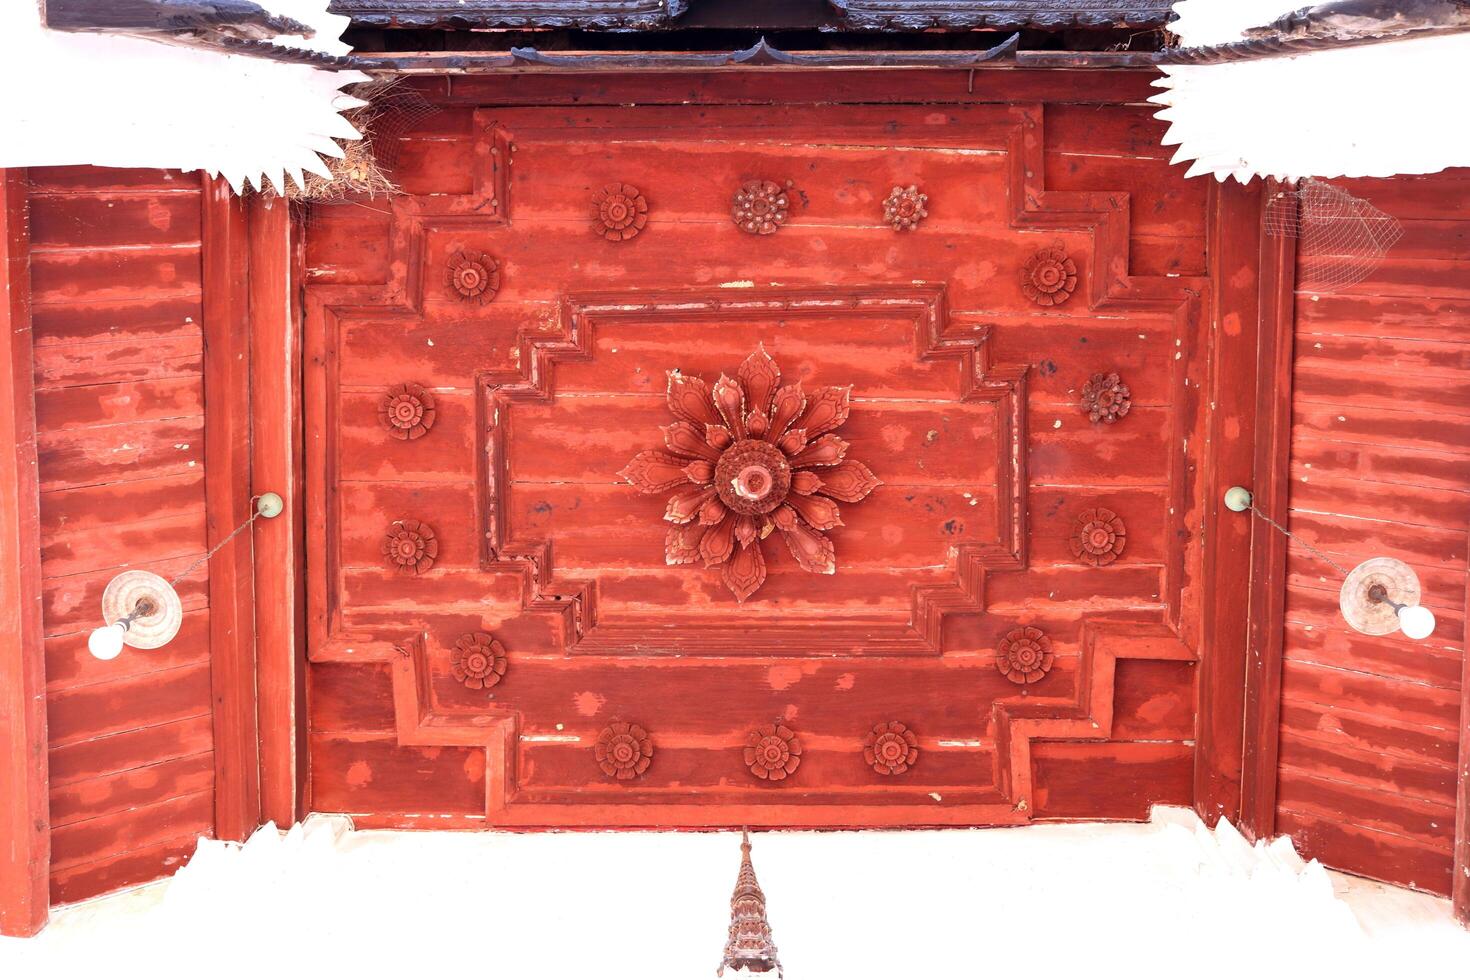 Thai native ancient art on red painted wood ceiling of Buddhism temple in Thailand. photo